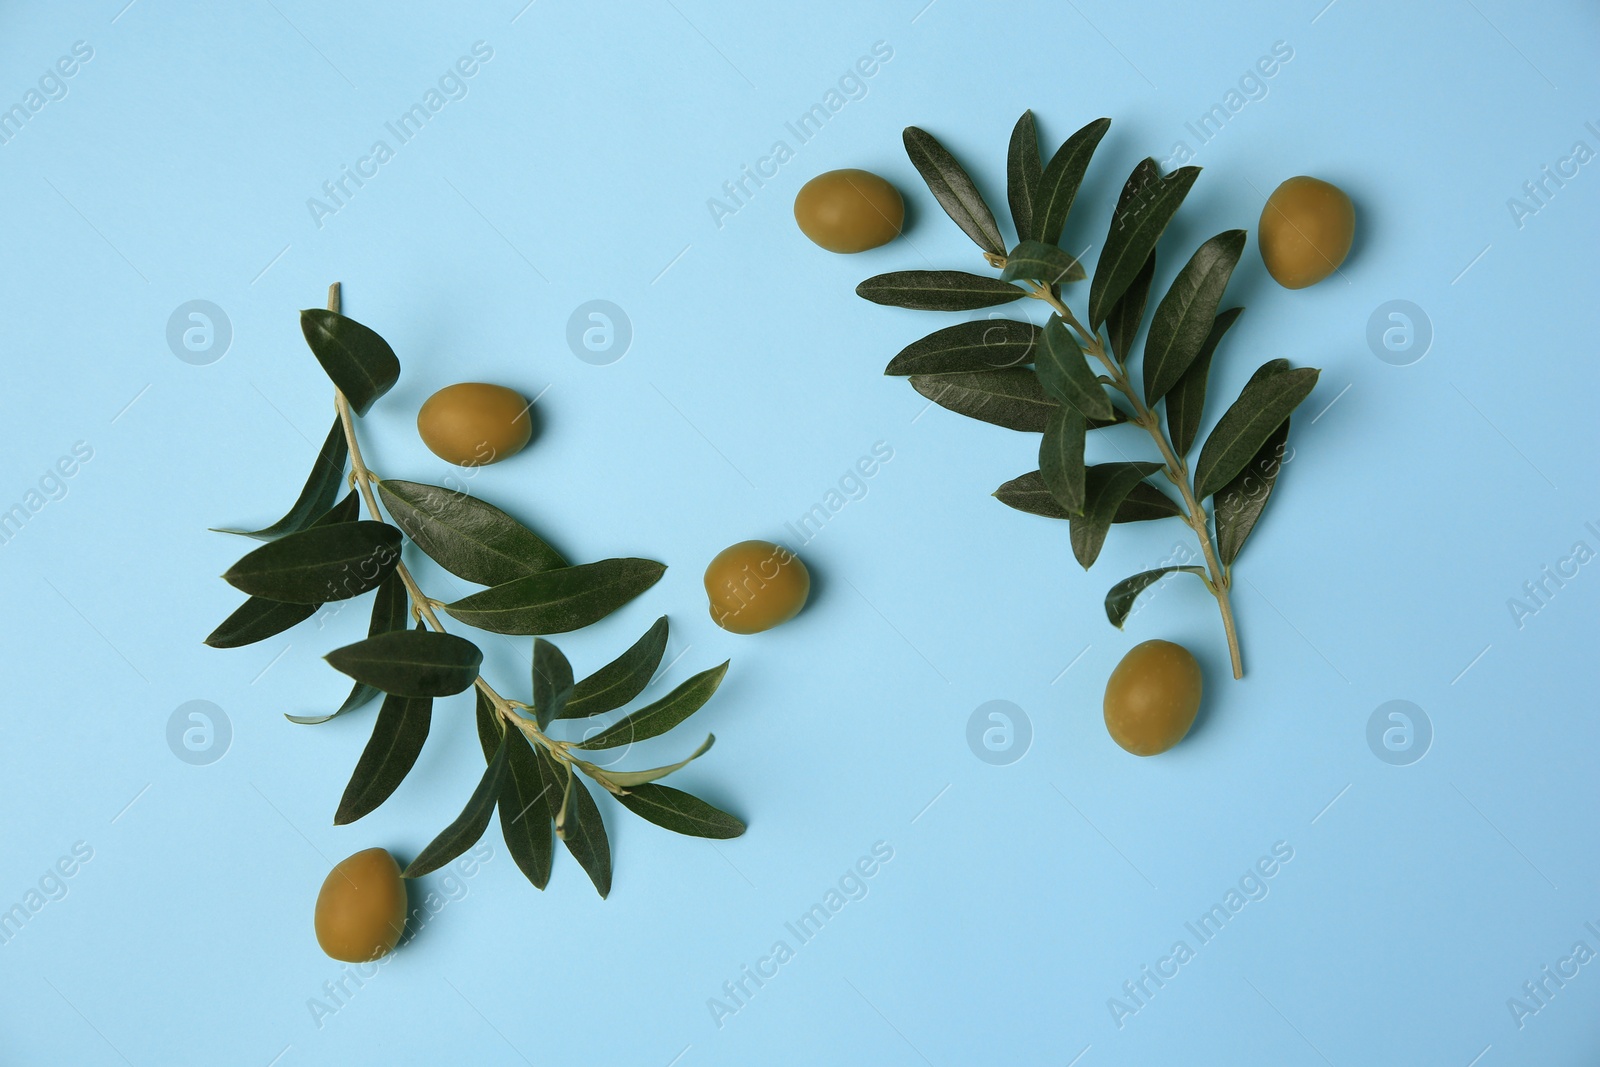 Photo of Fresh olives and green leaves on light blue background, flat lay